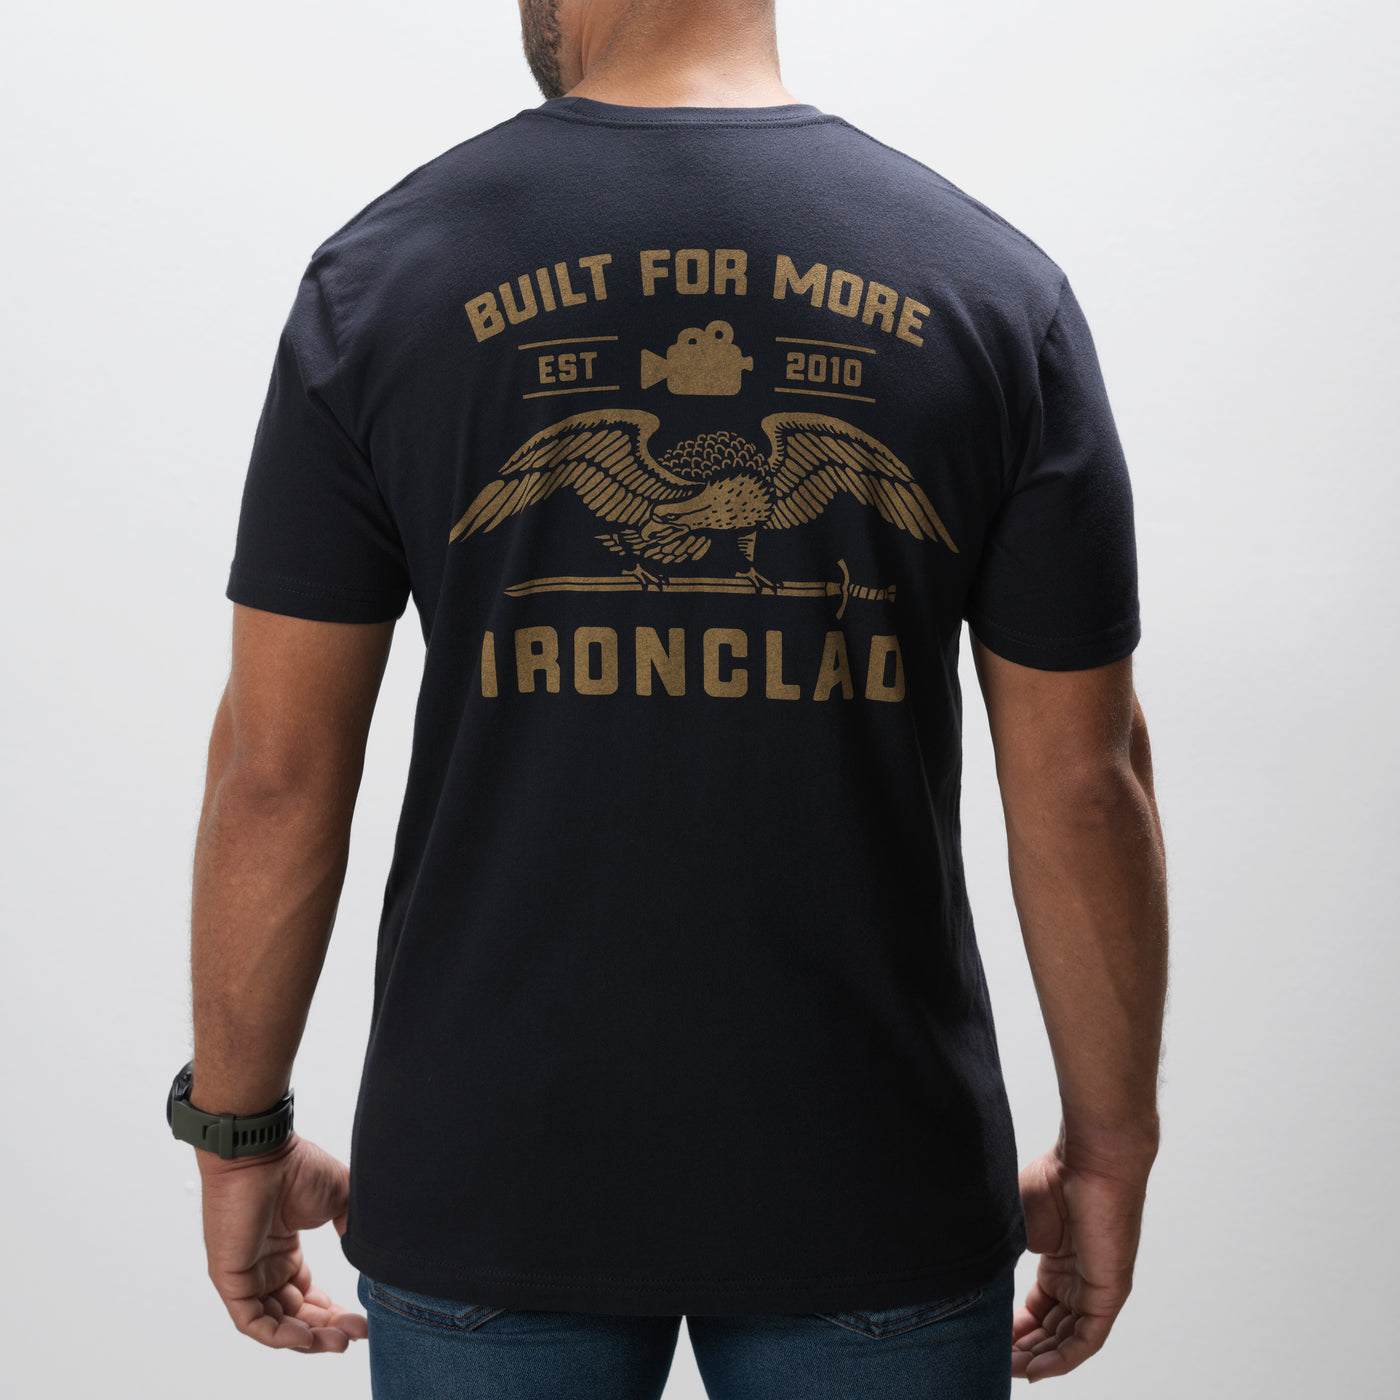 BUILT FOR MORE TEE